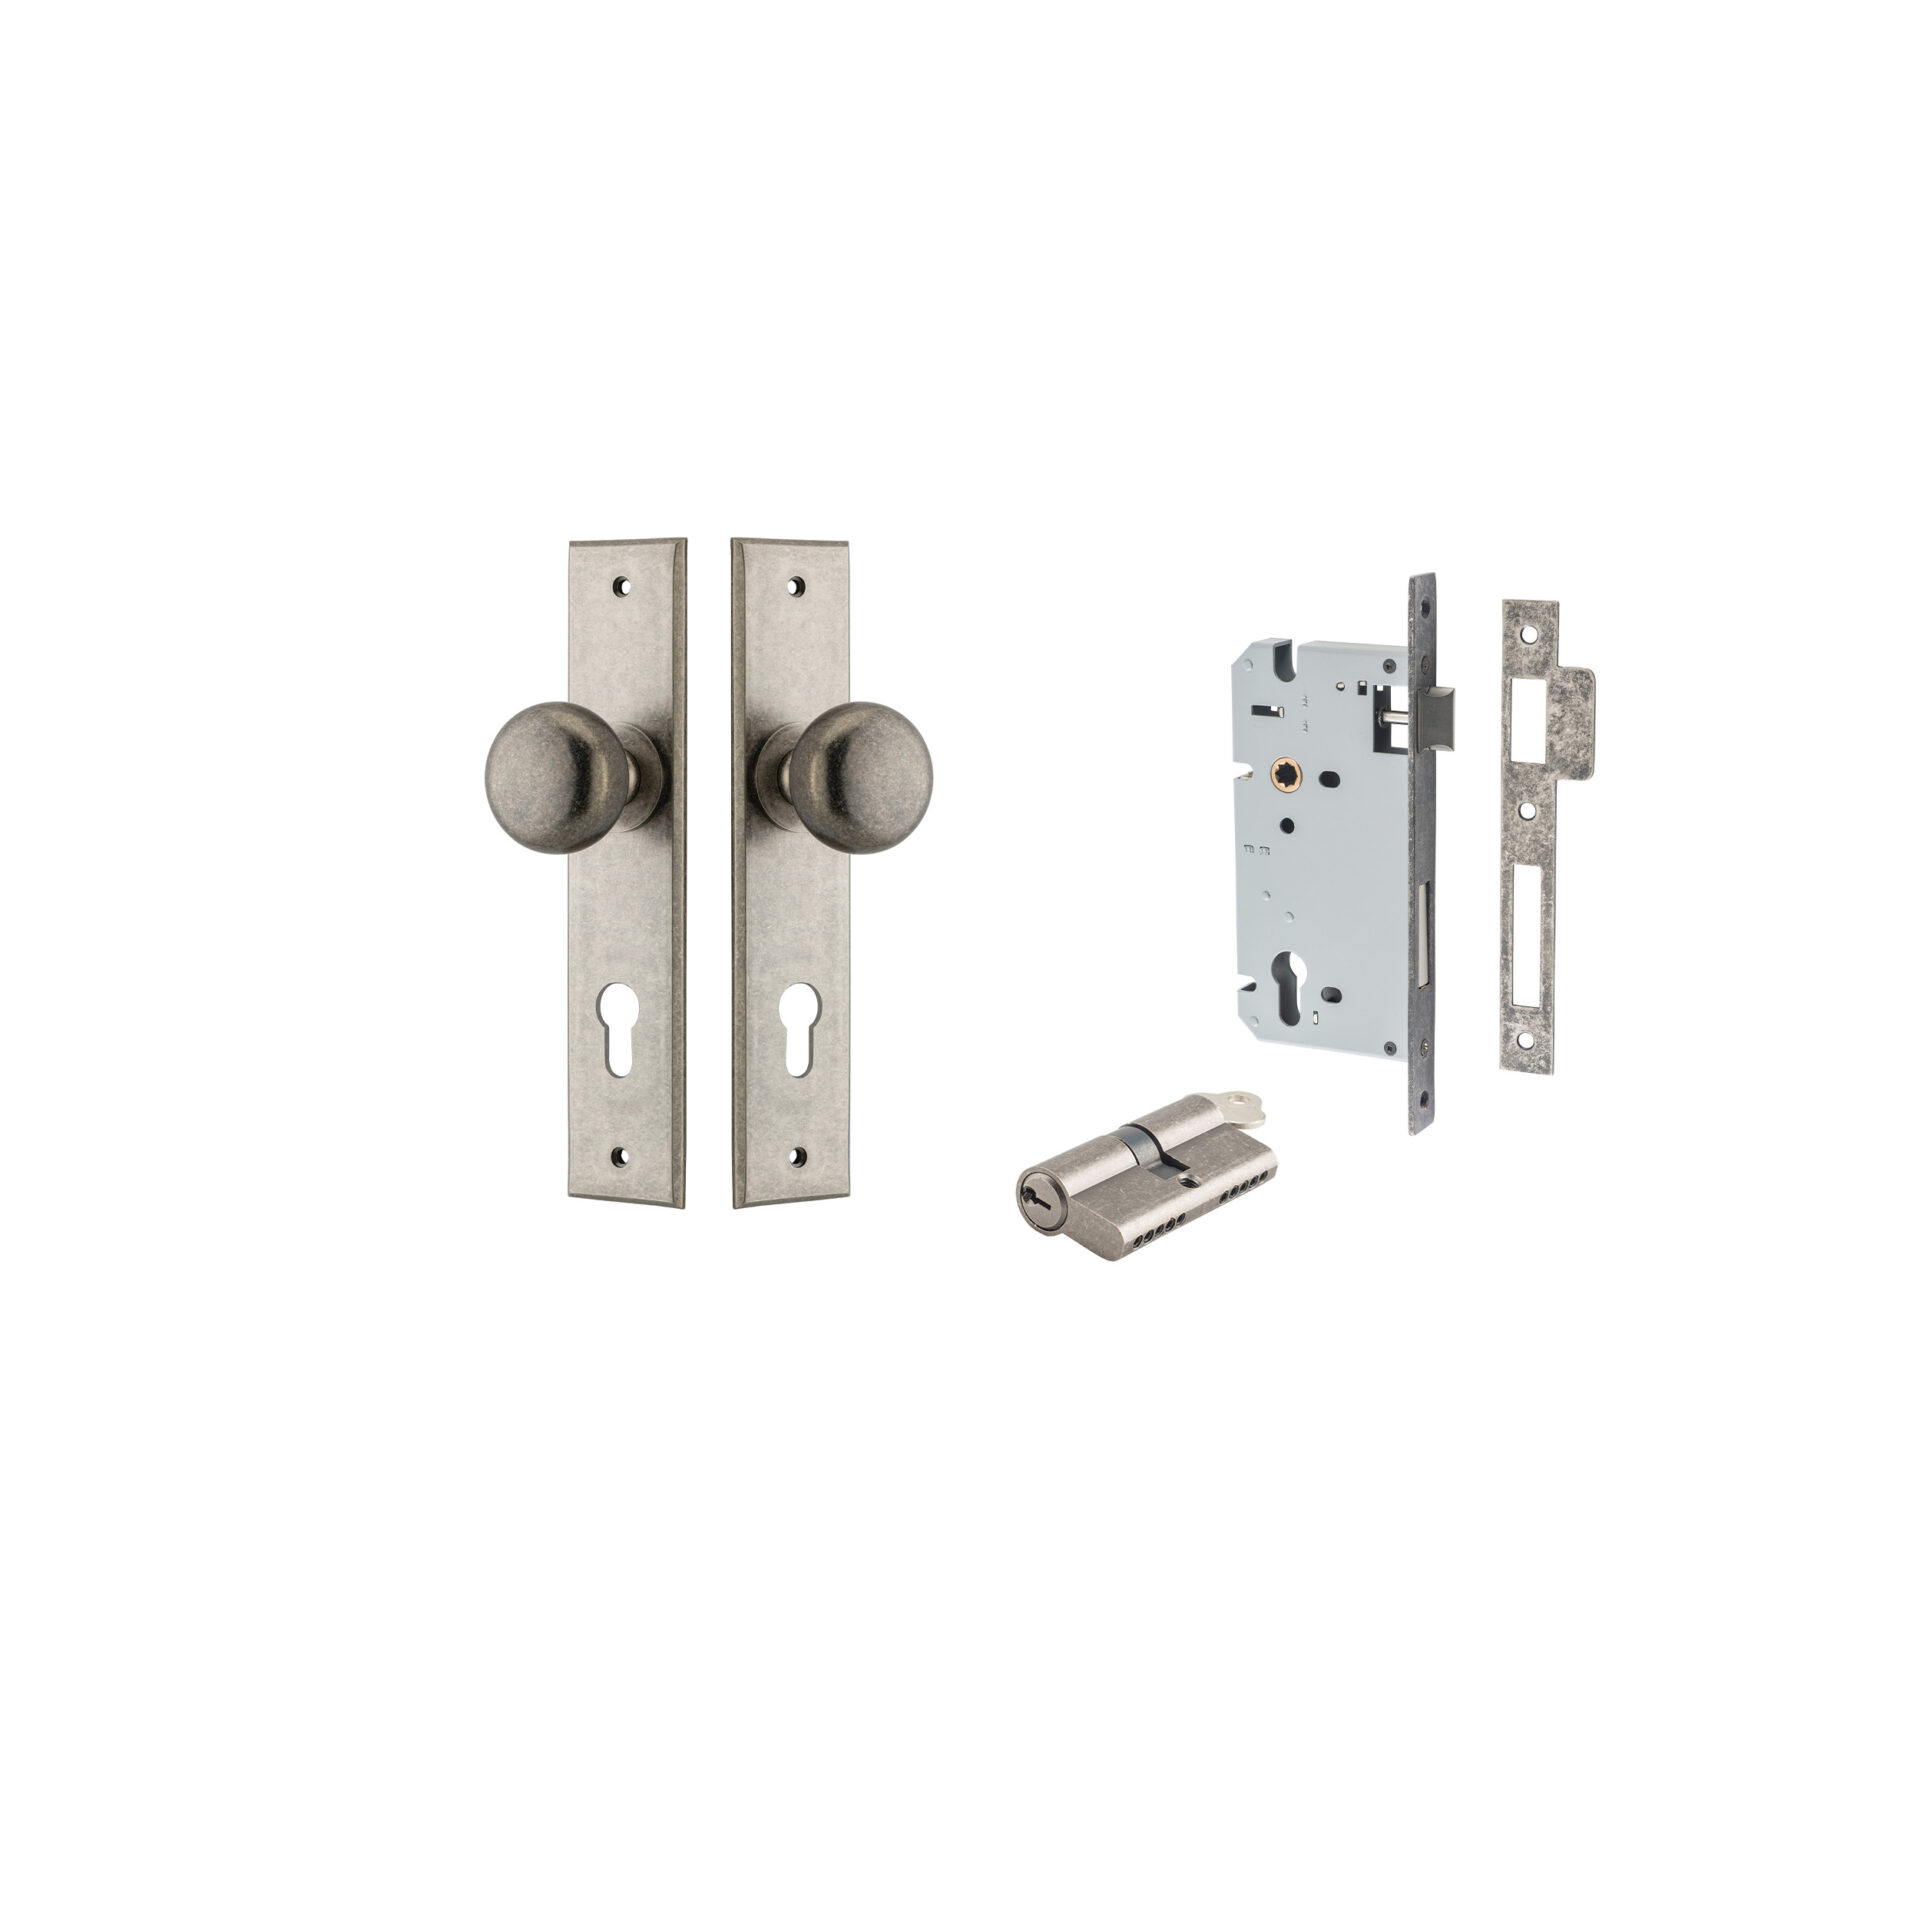 13946KENTR60KK - Cambridge Knob - Chamfered Backplate Entrance Kit with High Security Lock - Distressed Nickel - Entrance